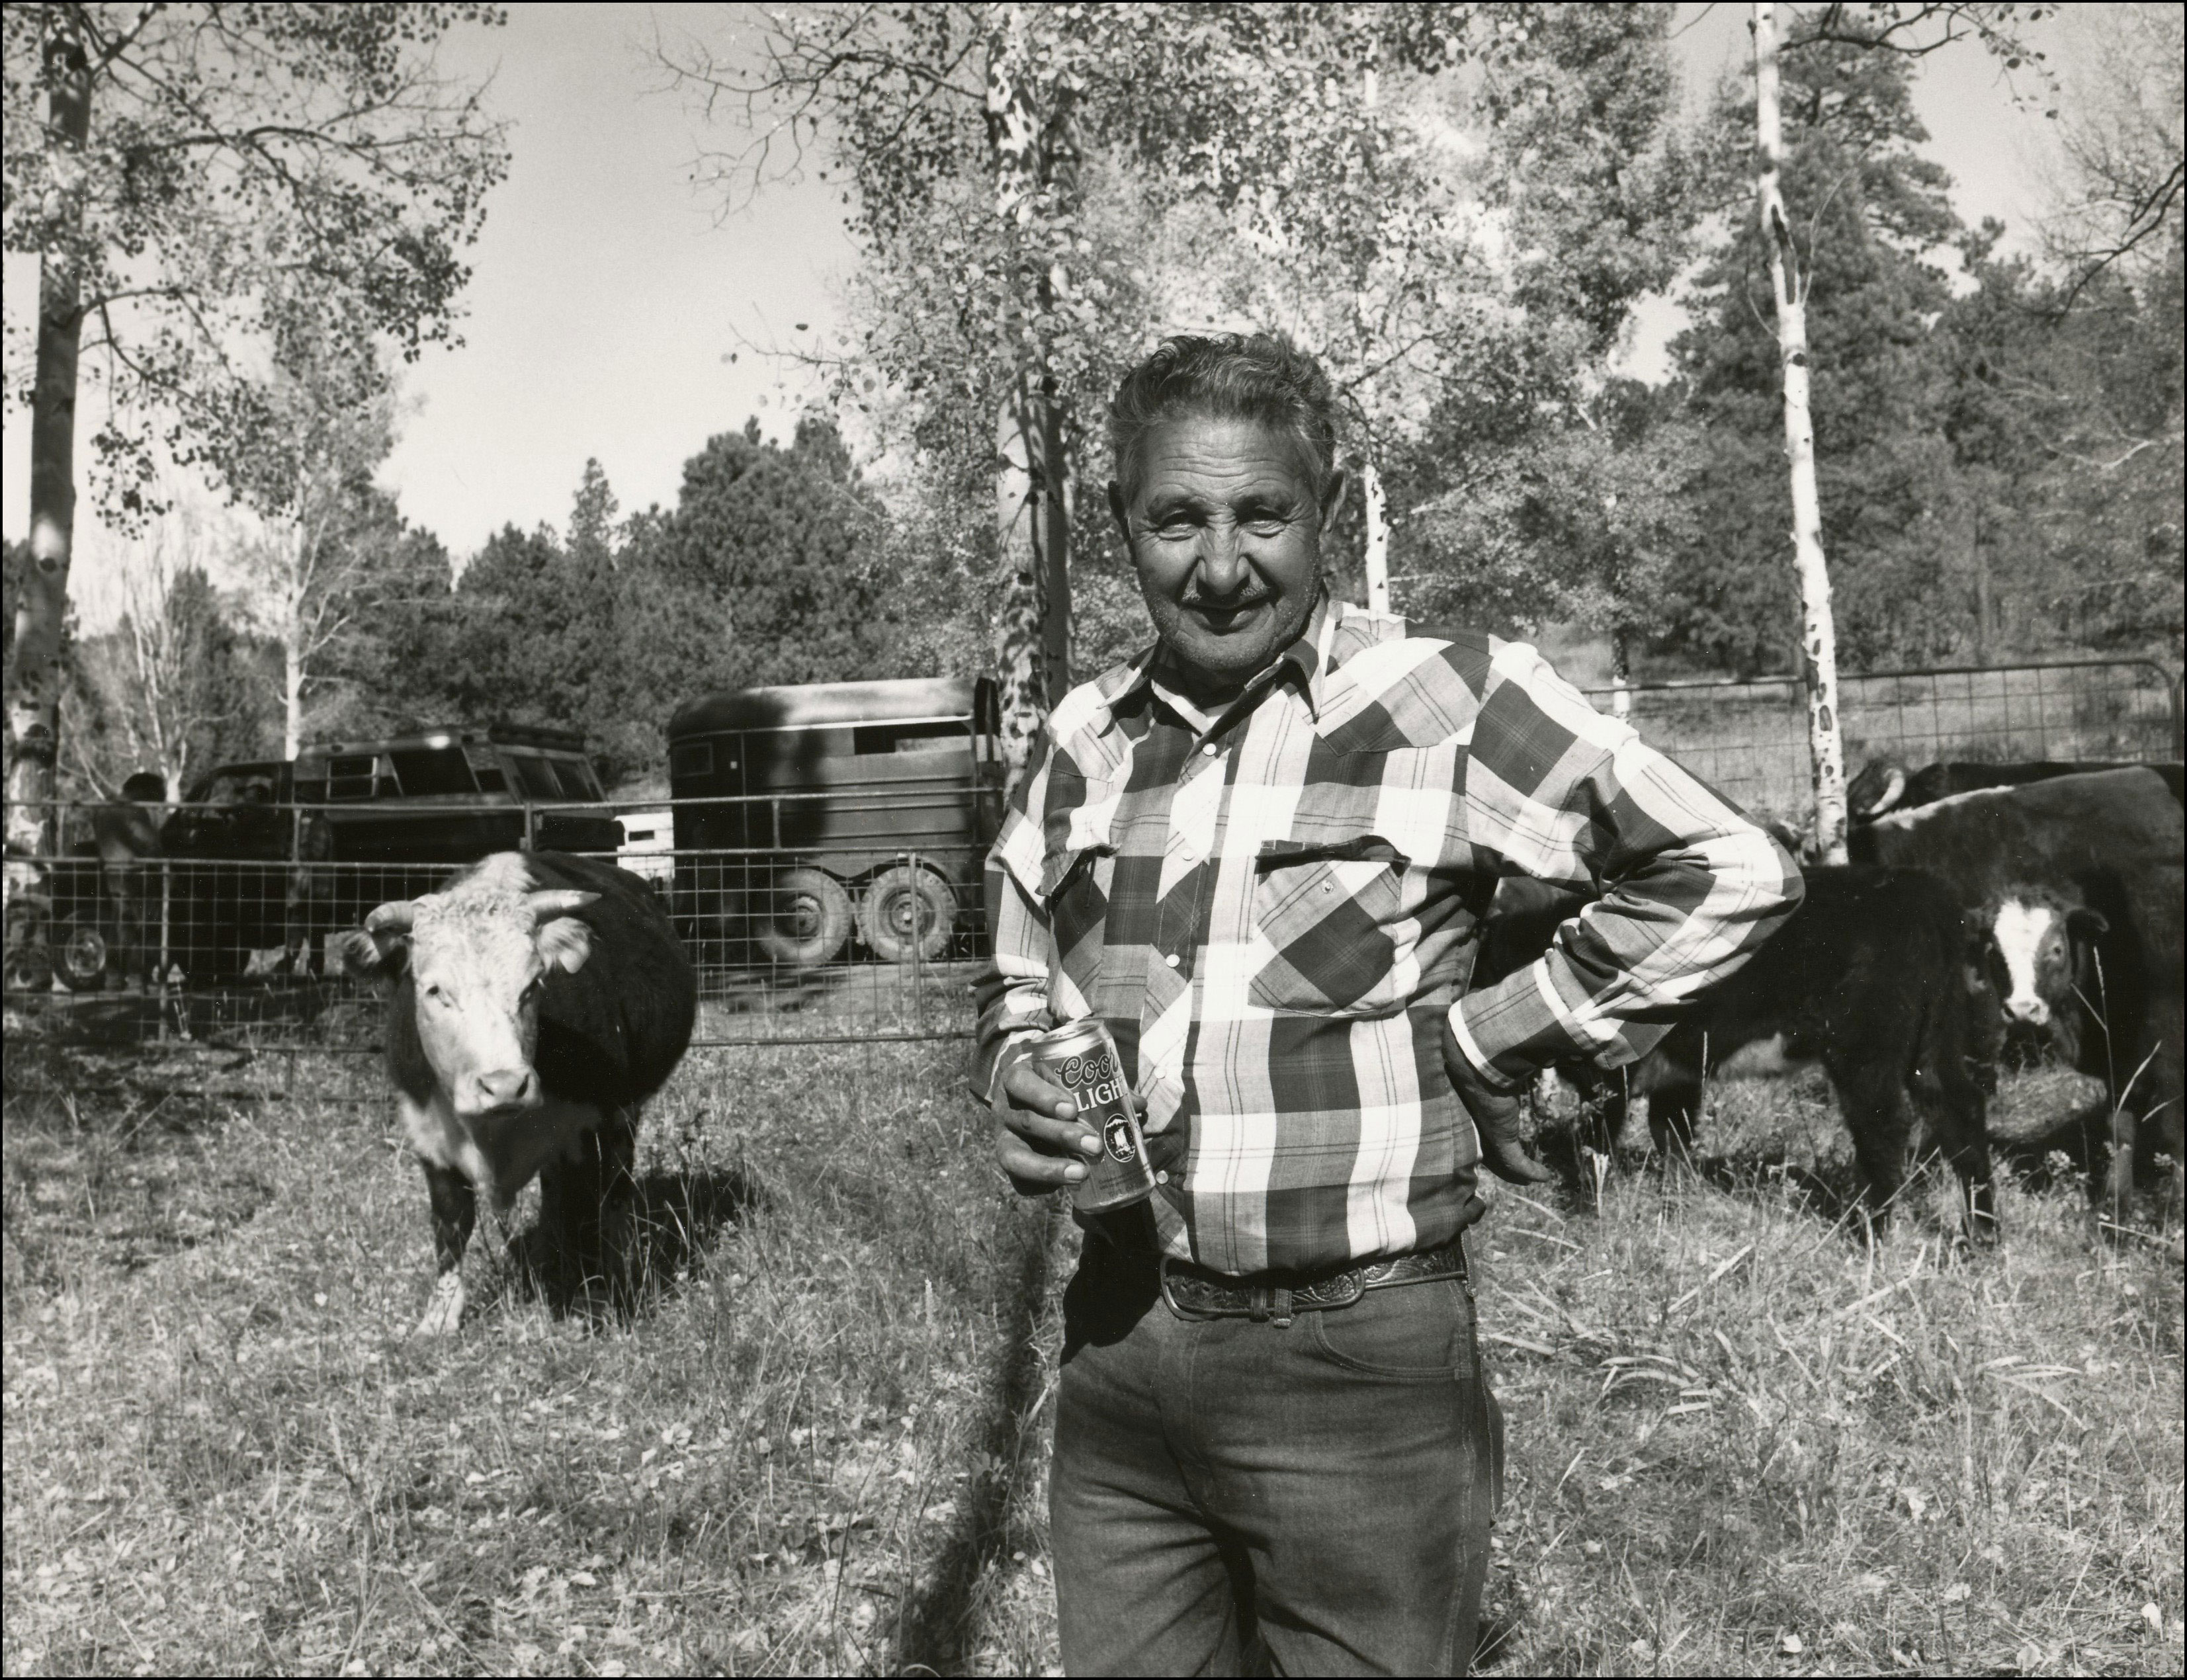 Rancher standing in pasture holding a can of coors light with hereford cattle behind him.